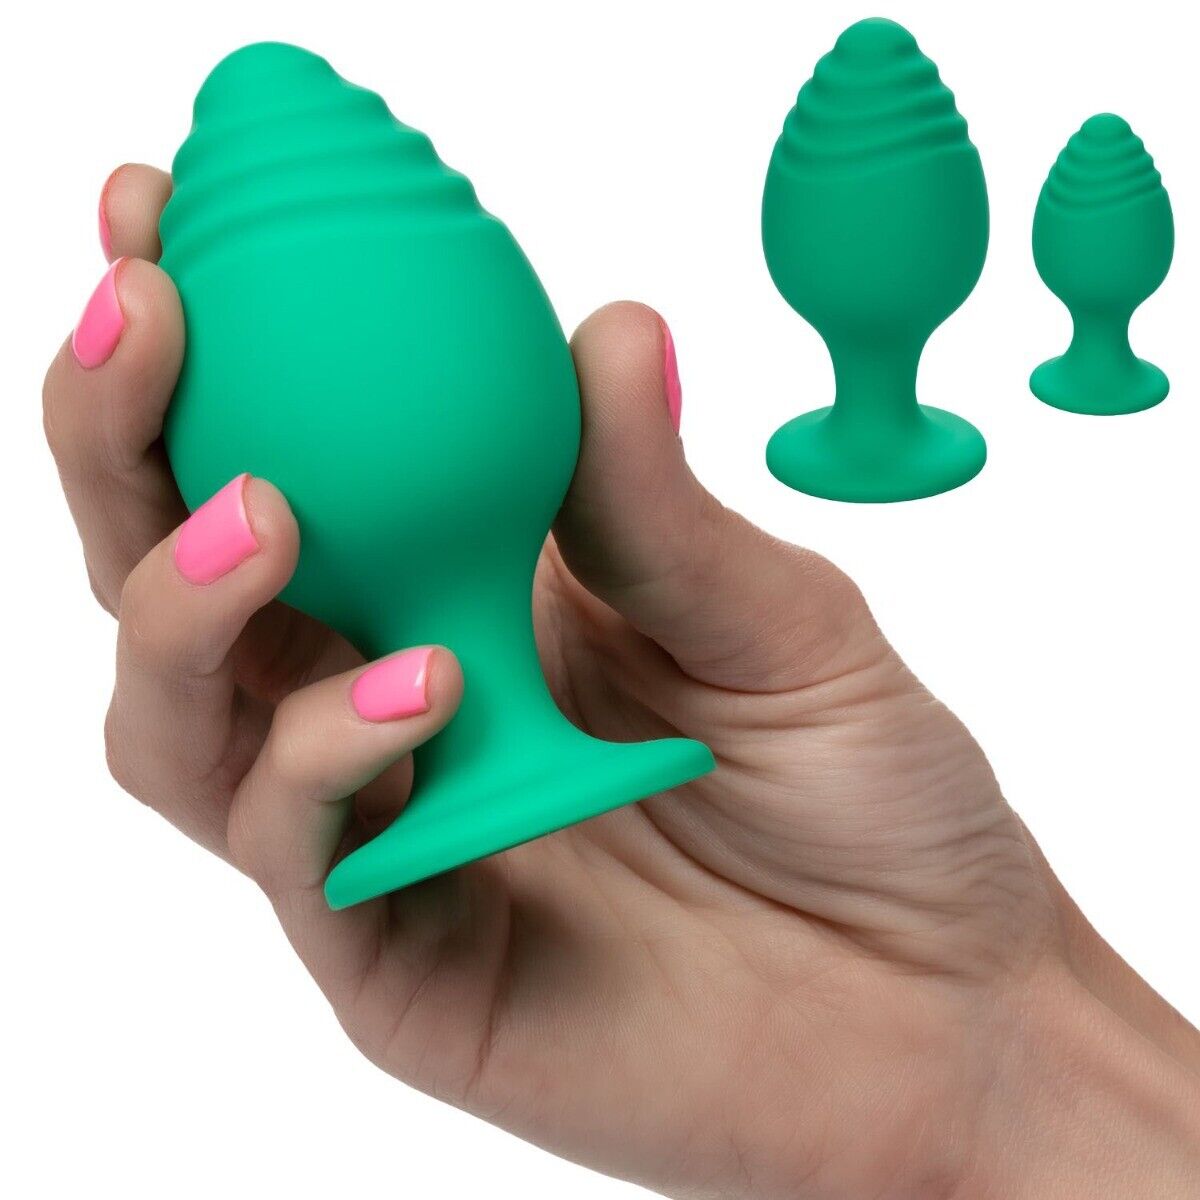 Silicone Anal Butt Plug Beginner Anal Training Set Sex Toys for Men Women Couple